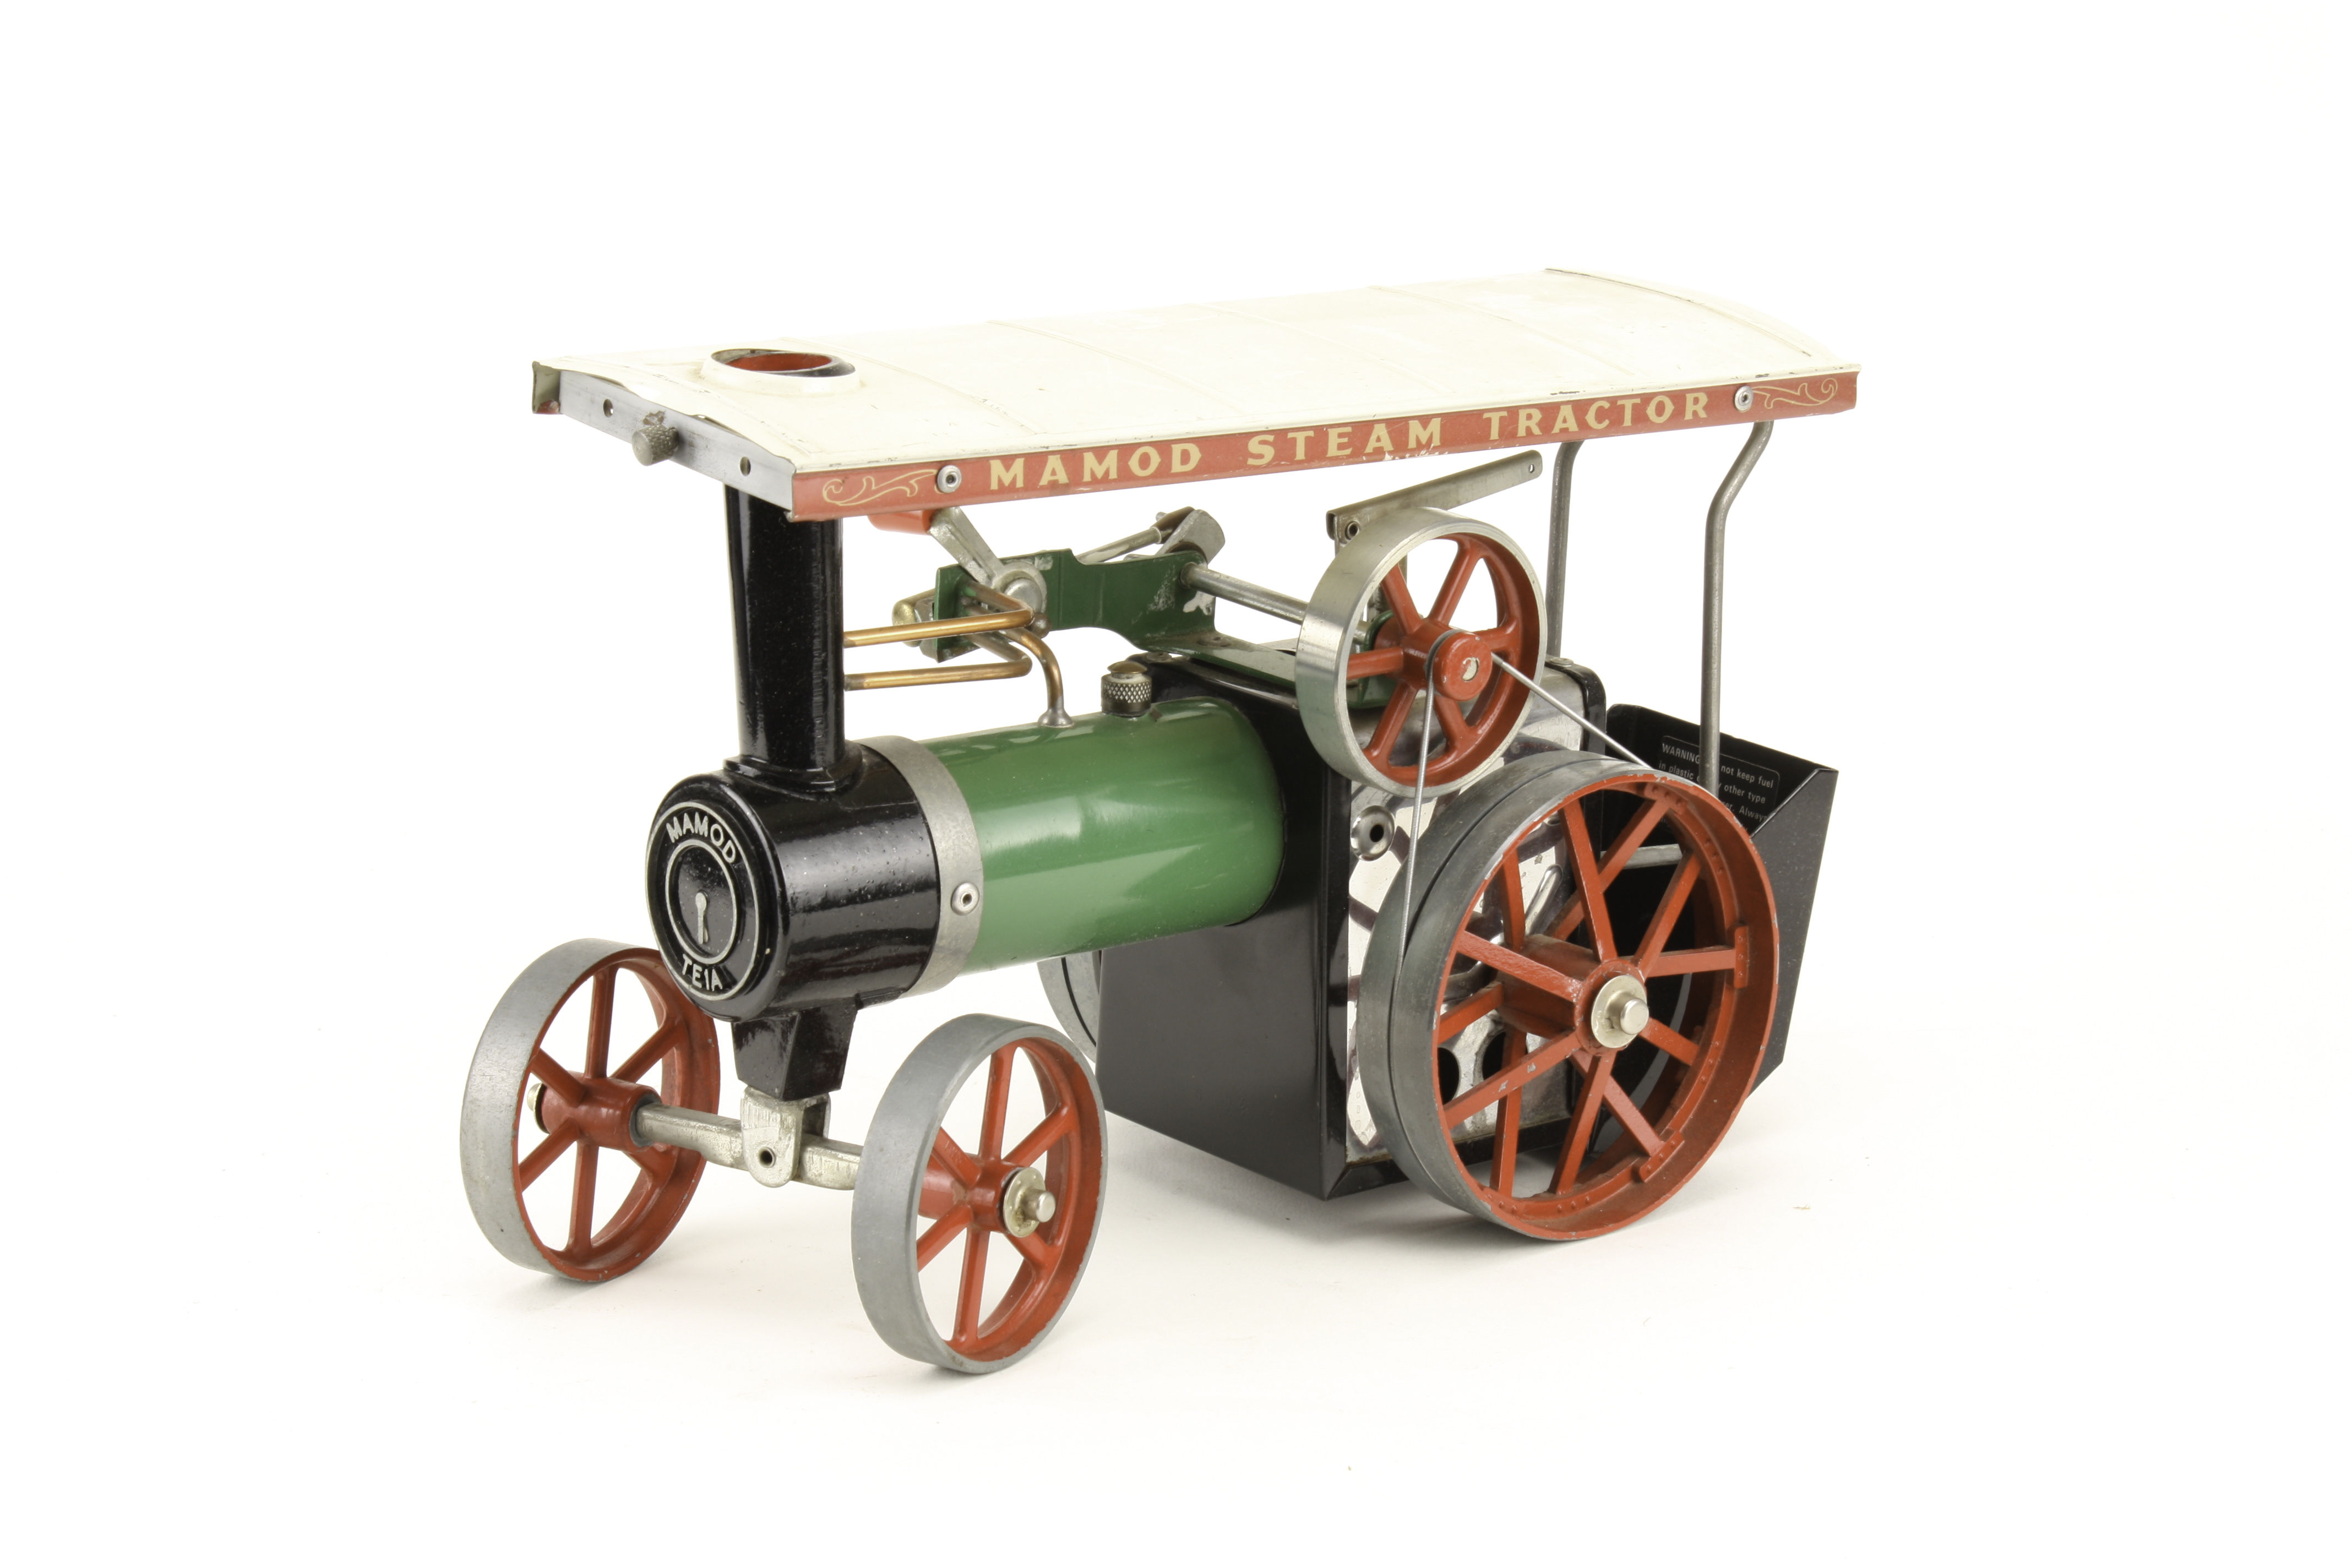 A Mamod TE1A Live Steam spirit-fired Traction Engine: with level plug, spirit burner, steering